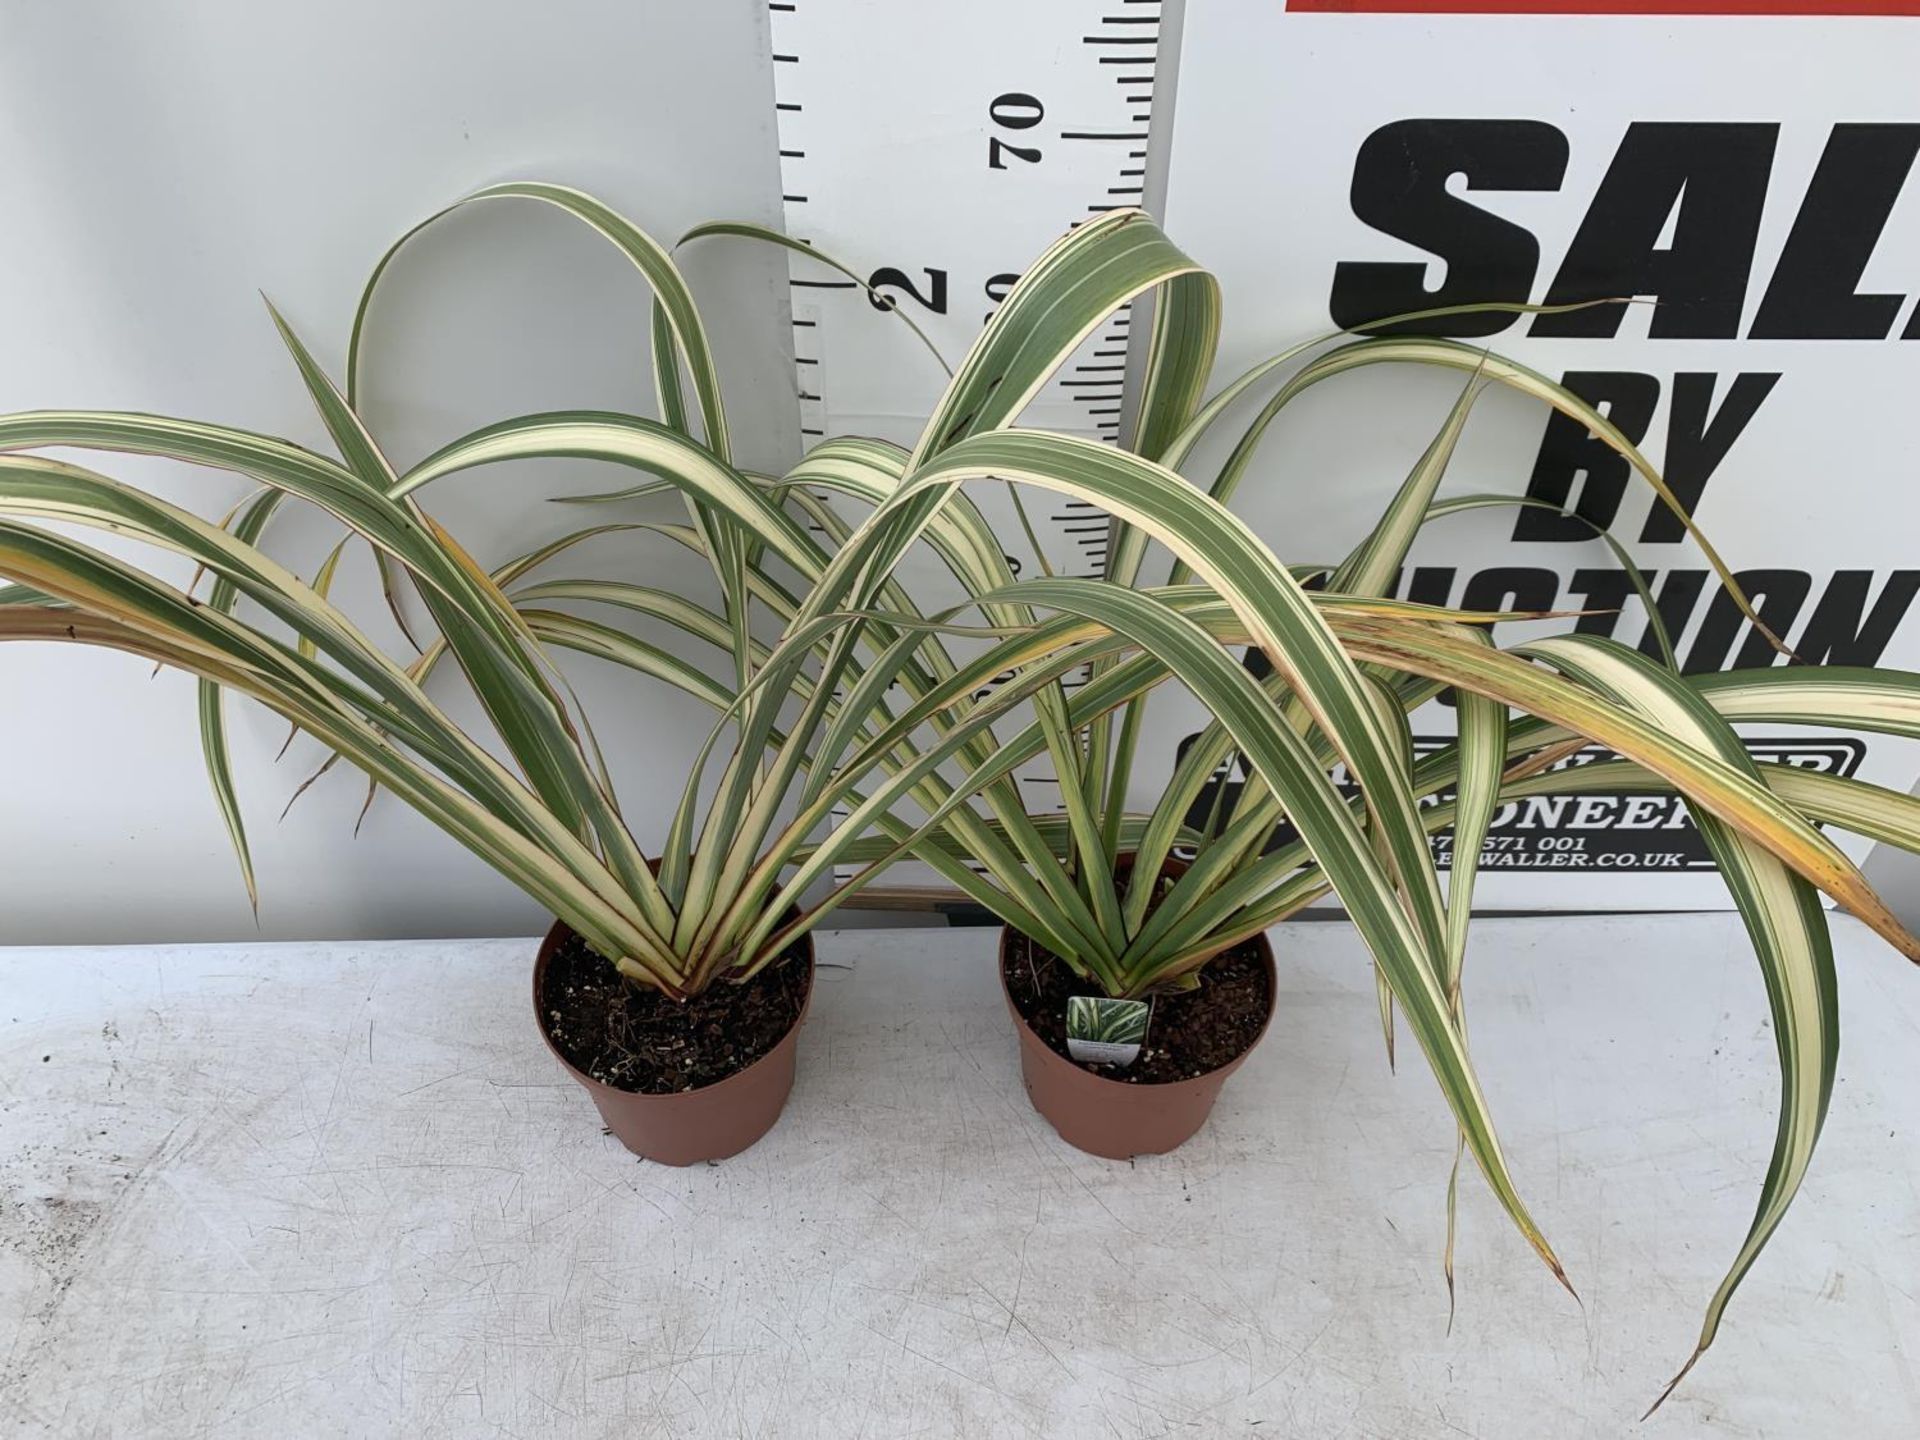 TWO GREEN PHORMIUM TENAX 'CREAM DELIGHT' APPROX 70CM IN HEIGHT IN 3 LTR POTS PLUS VAT TO BE SOLD FOR - Image 2 of 5